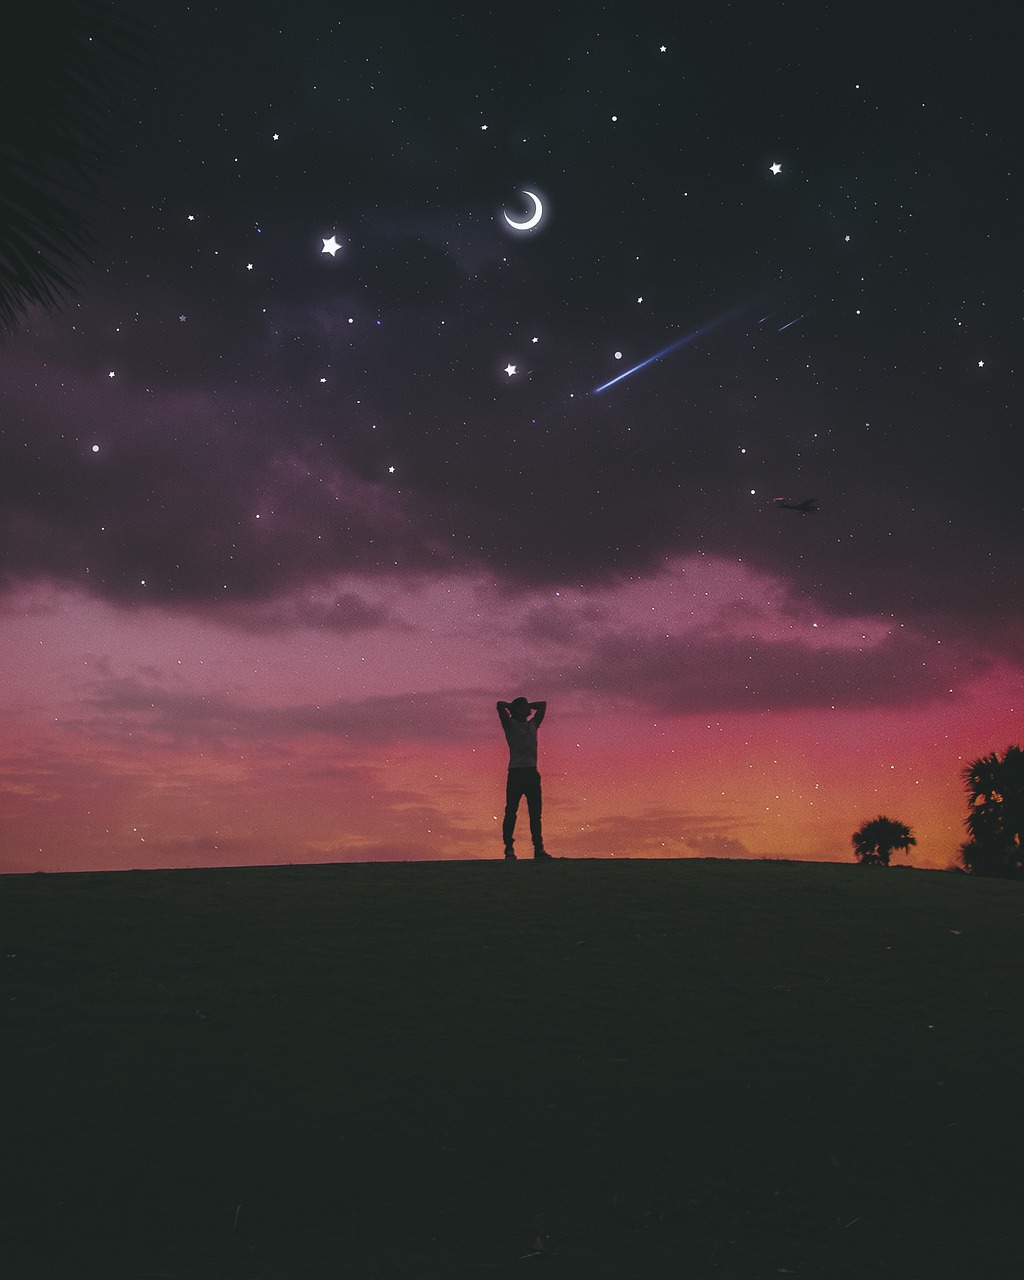 A figure stands silhouetted against dawn breaking with a night sky overhead.